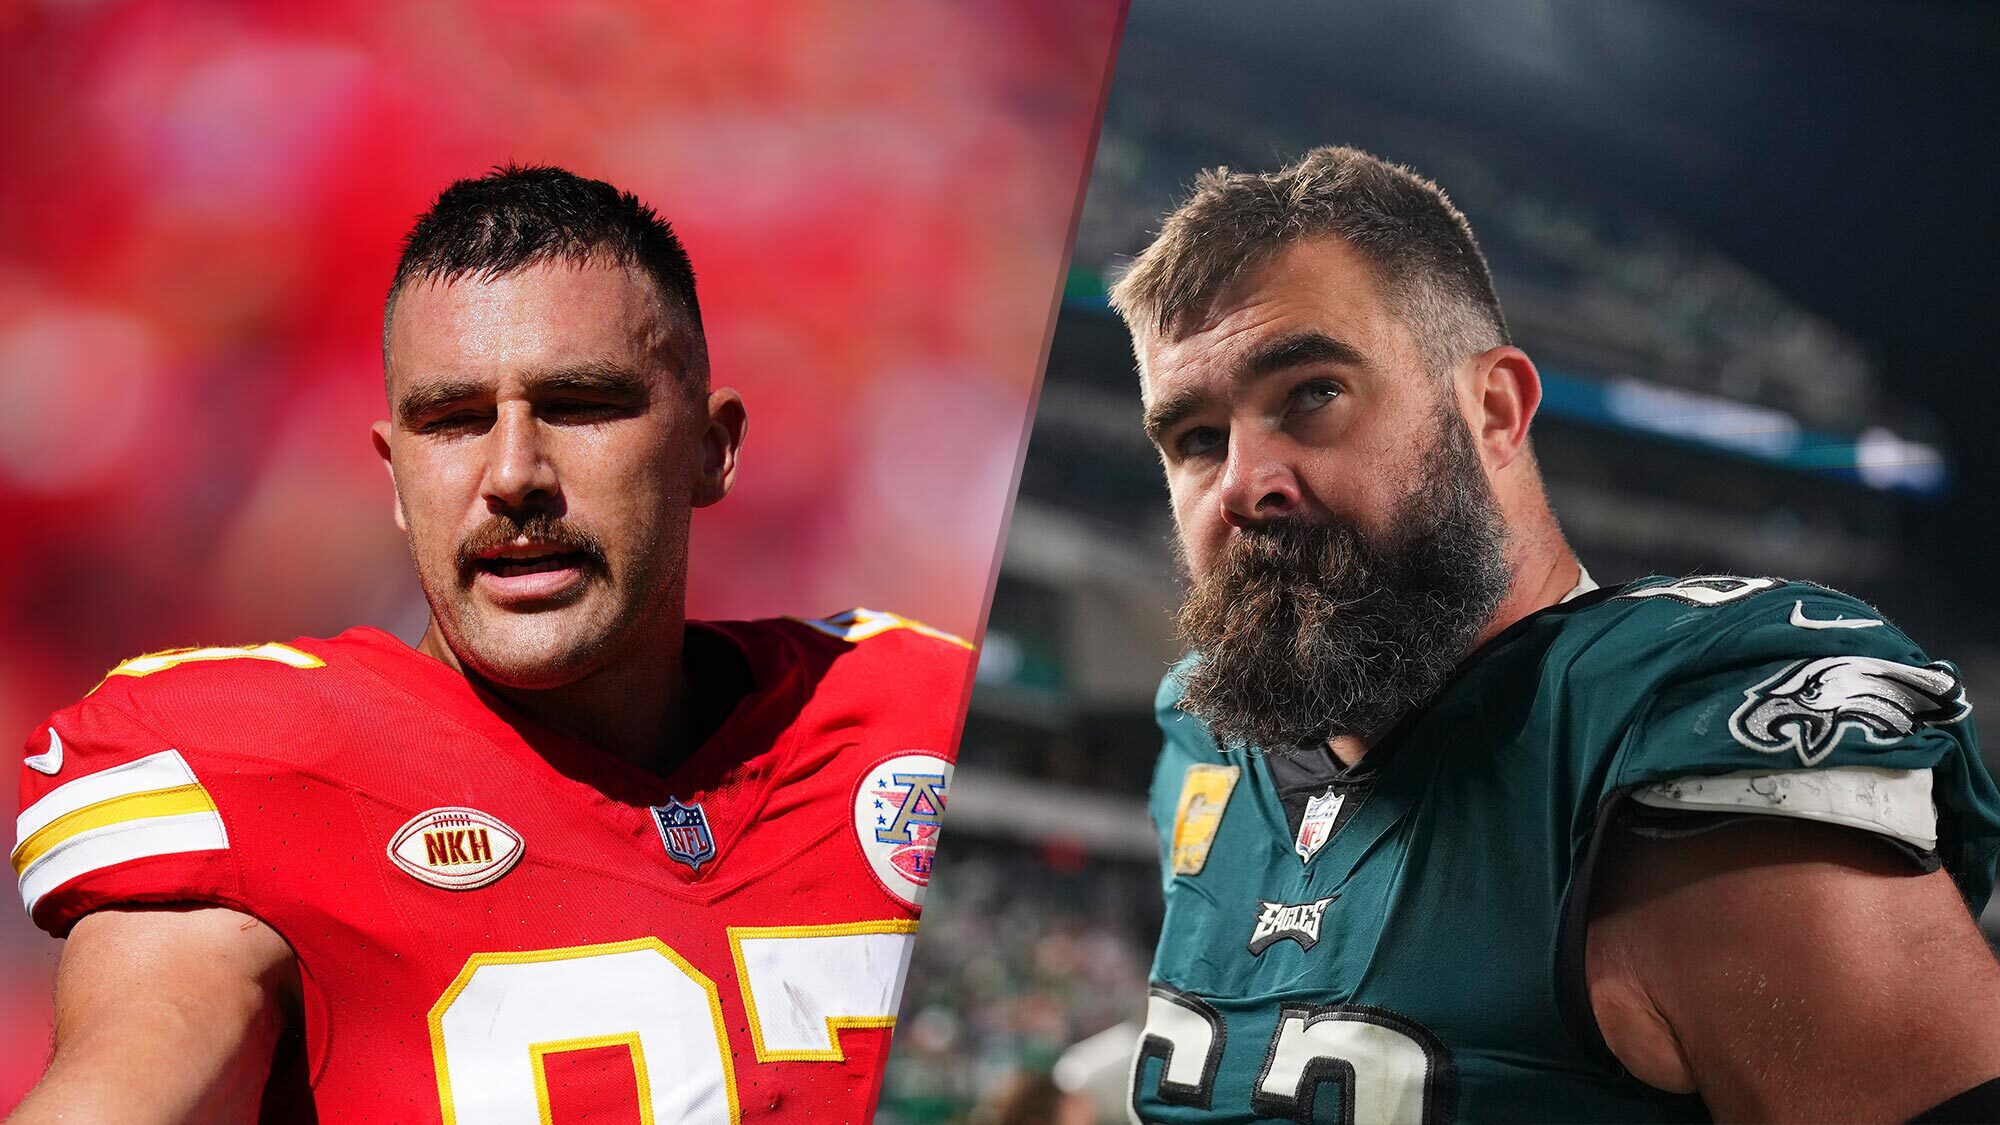 Eagles Vs Chiefs Live Stream How To Watch Monday Night Football Nfl Week 11 Online Tonight